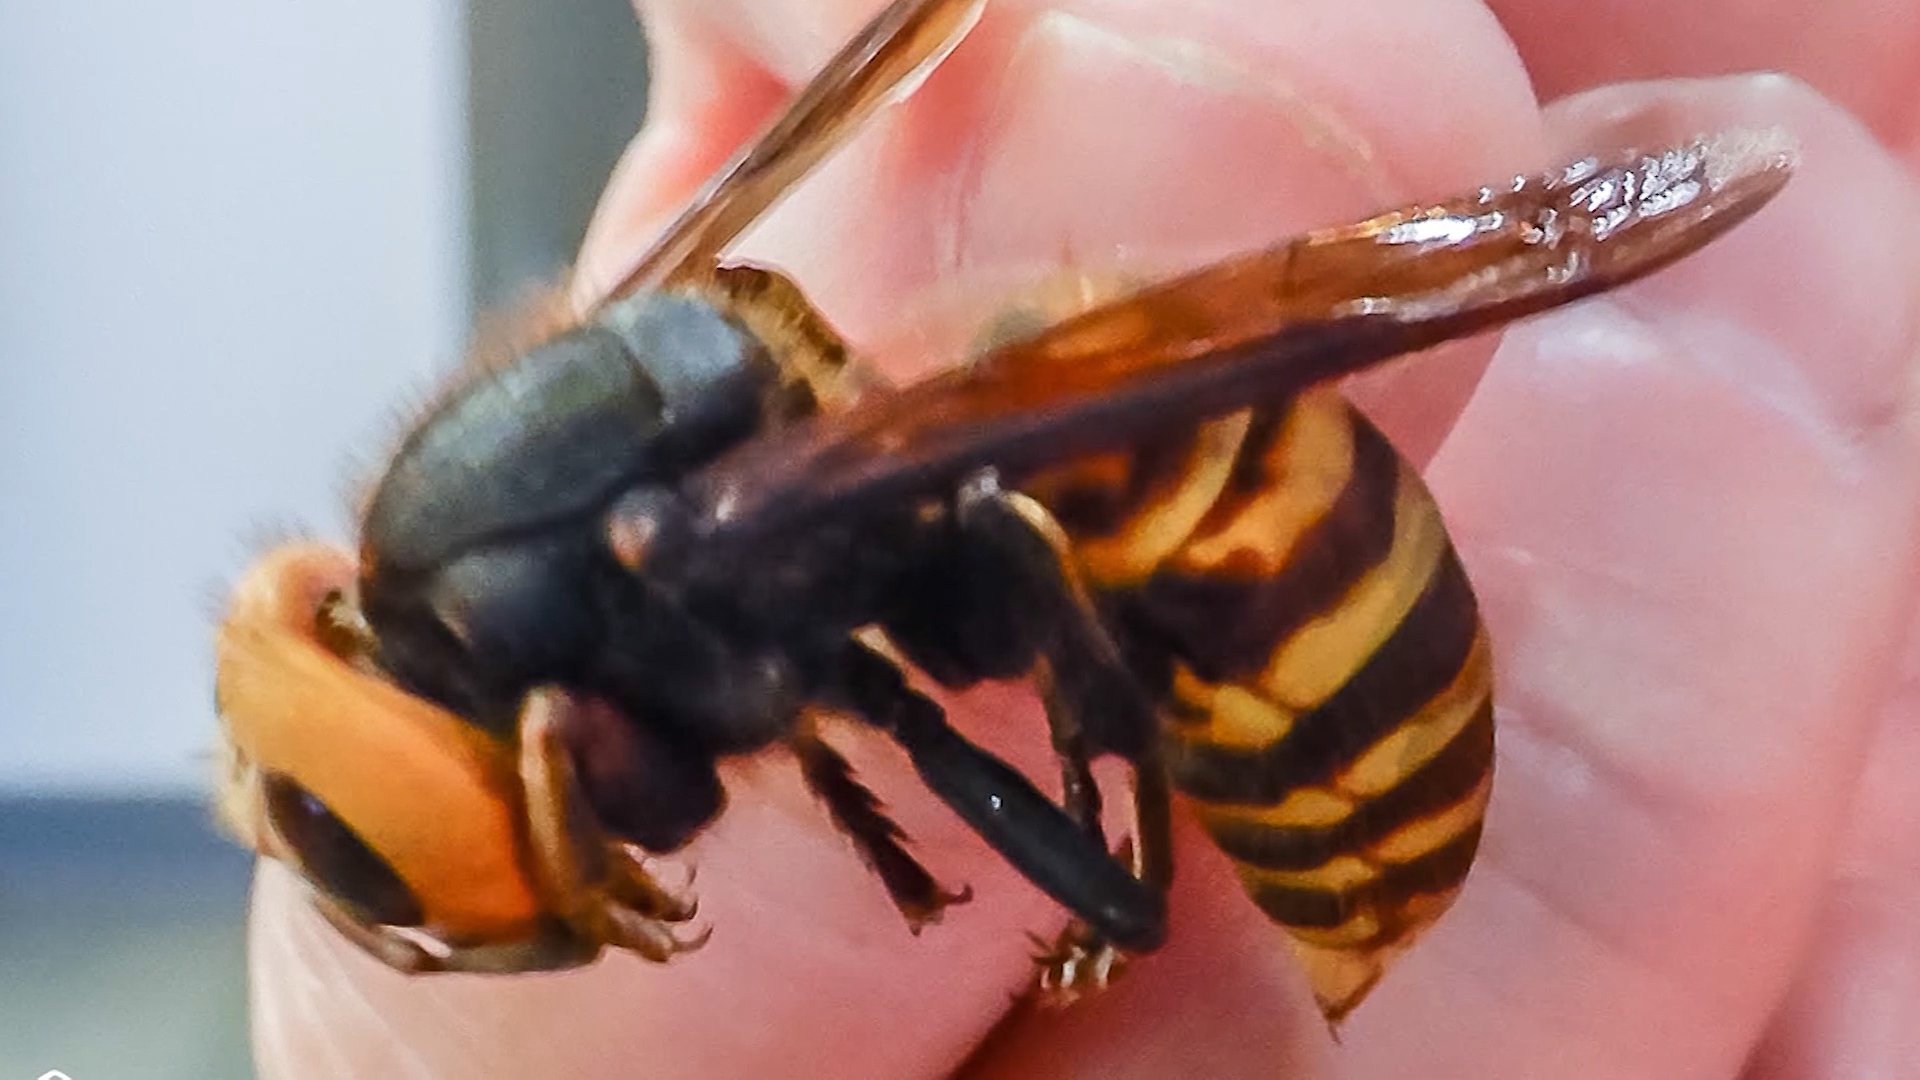 Murder Hornets Spotted in U.S., Pose Risk to Honeybees